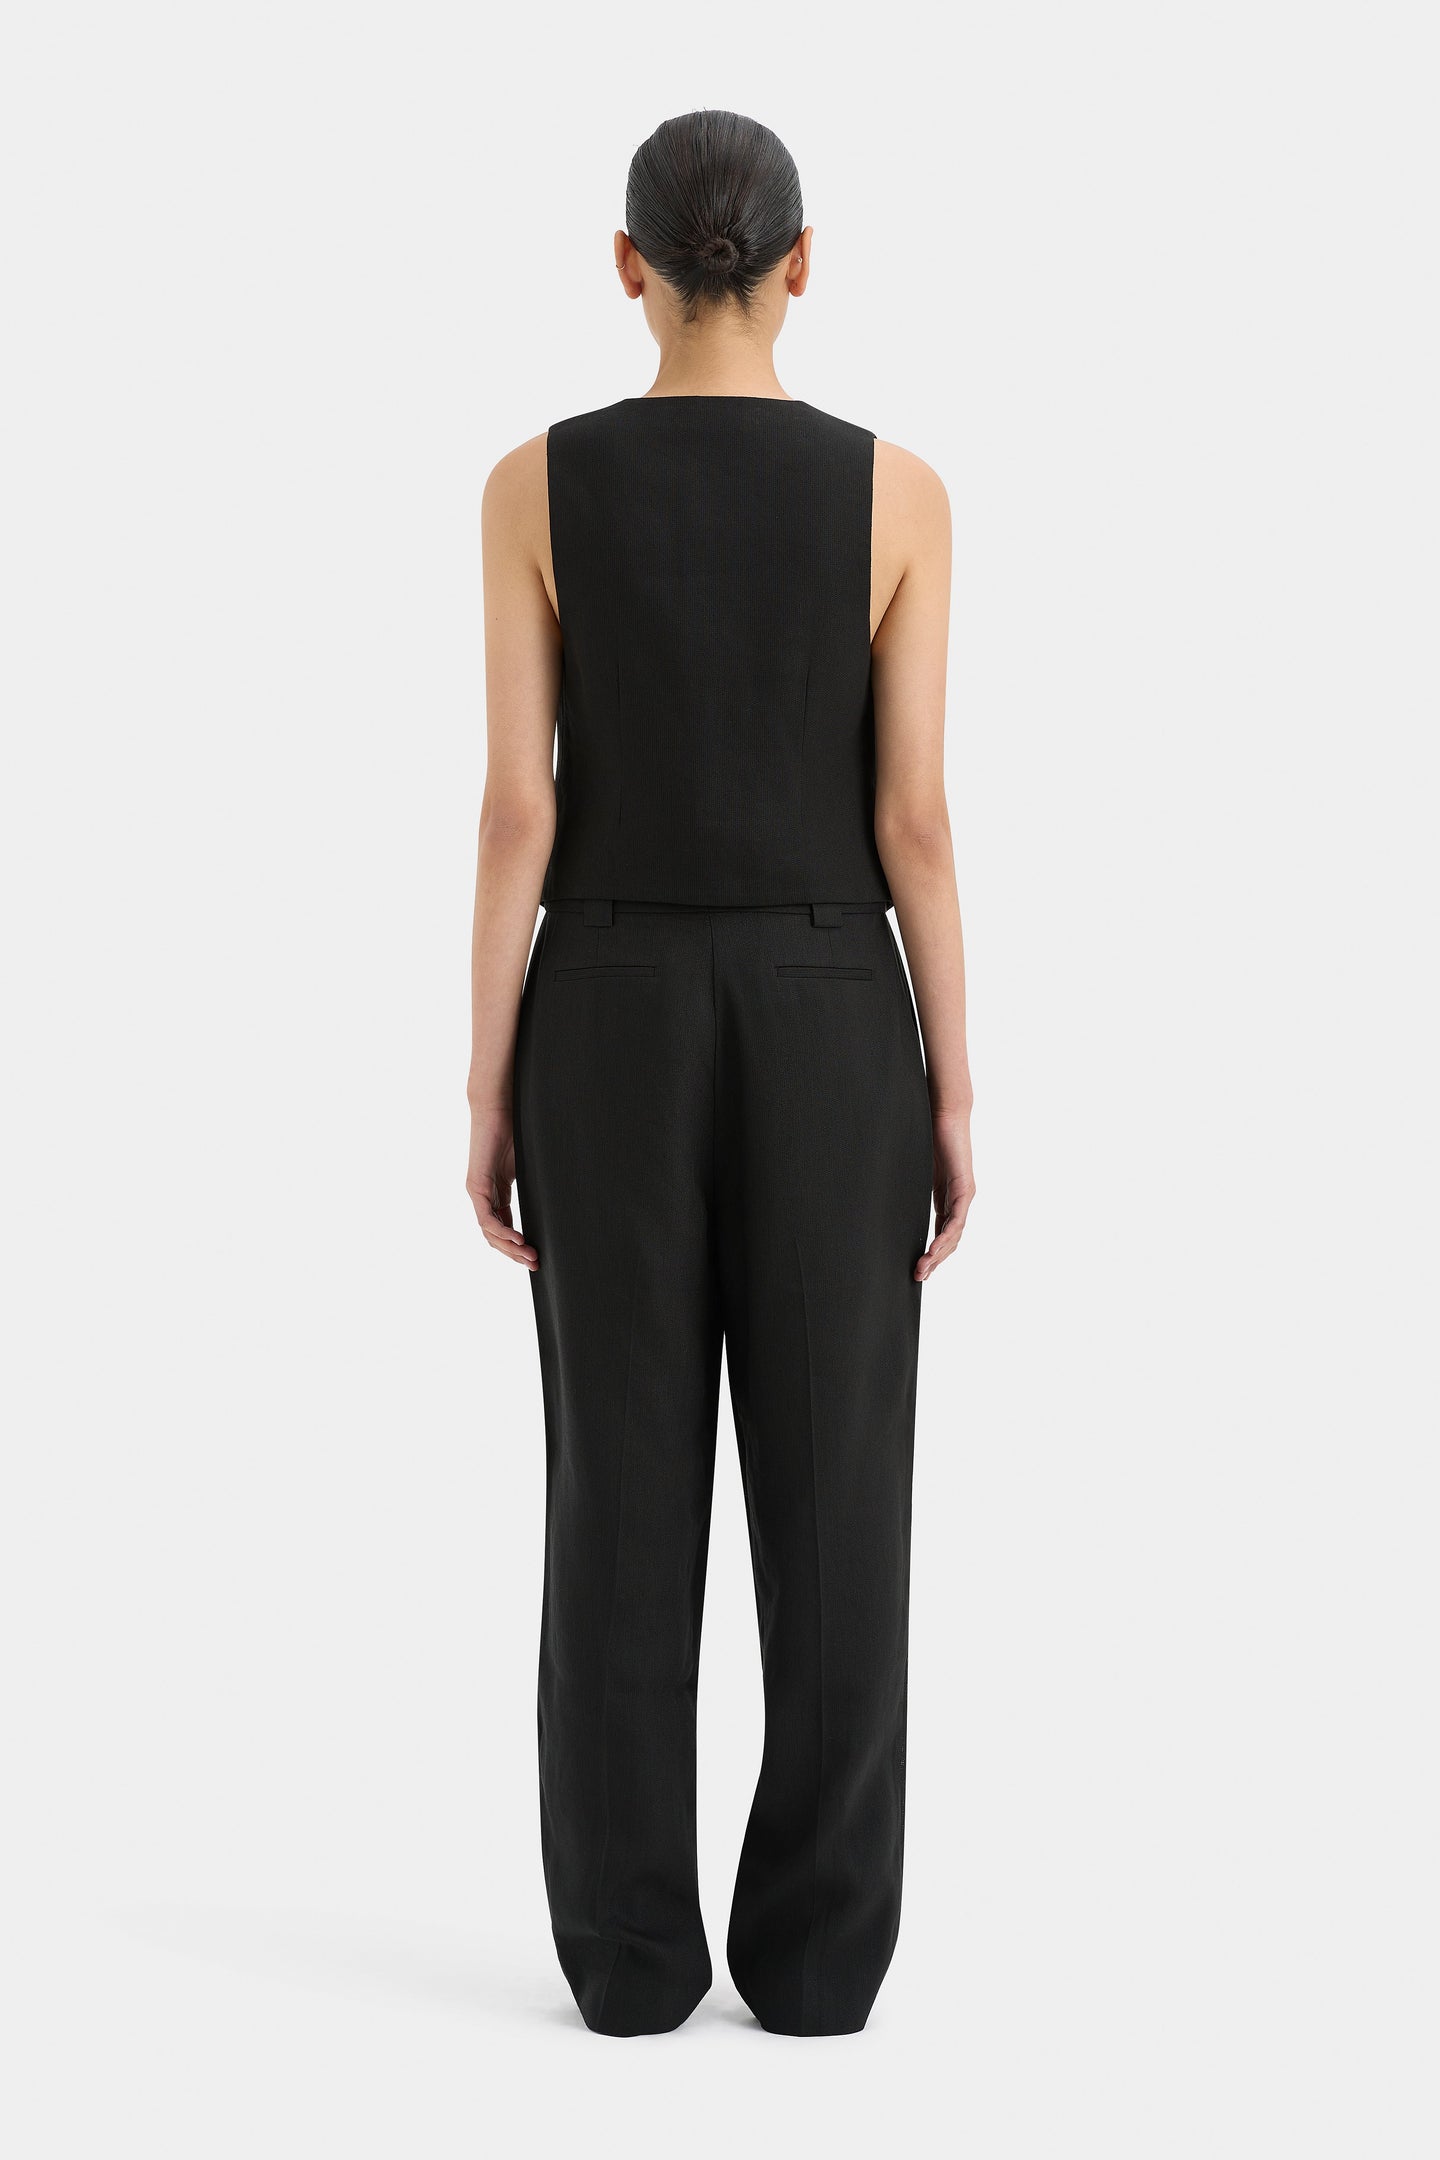 SIR the label Clemence Tailored Vest BLACK